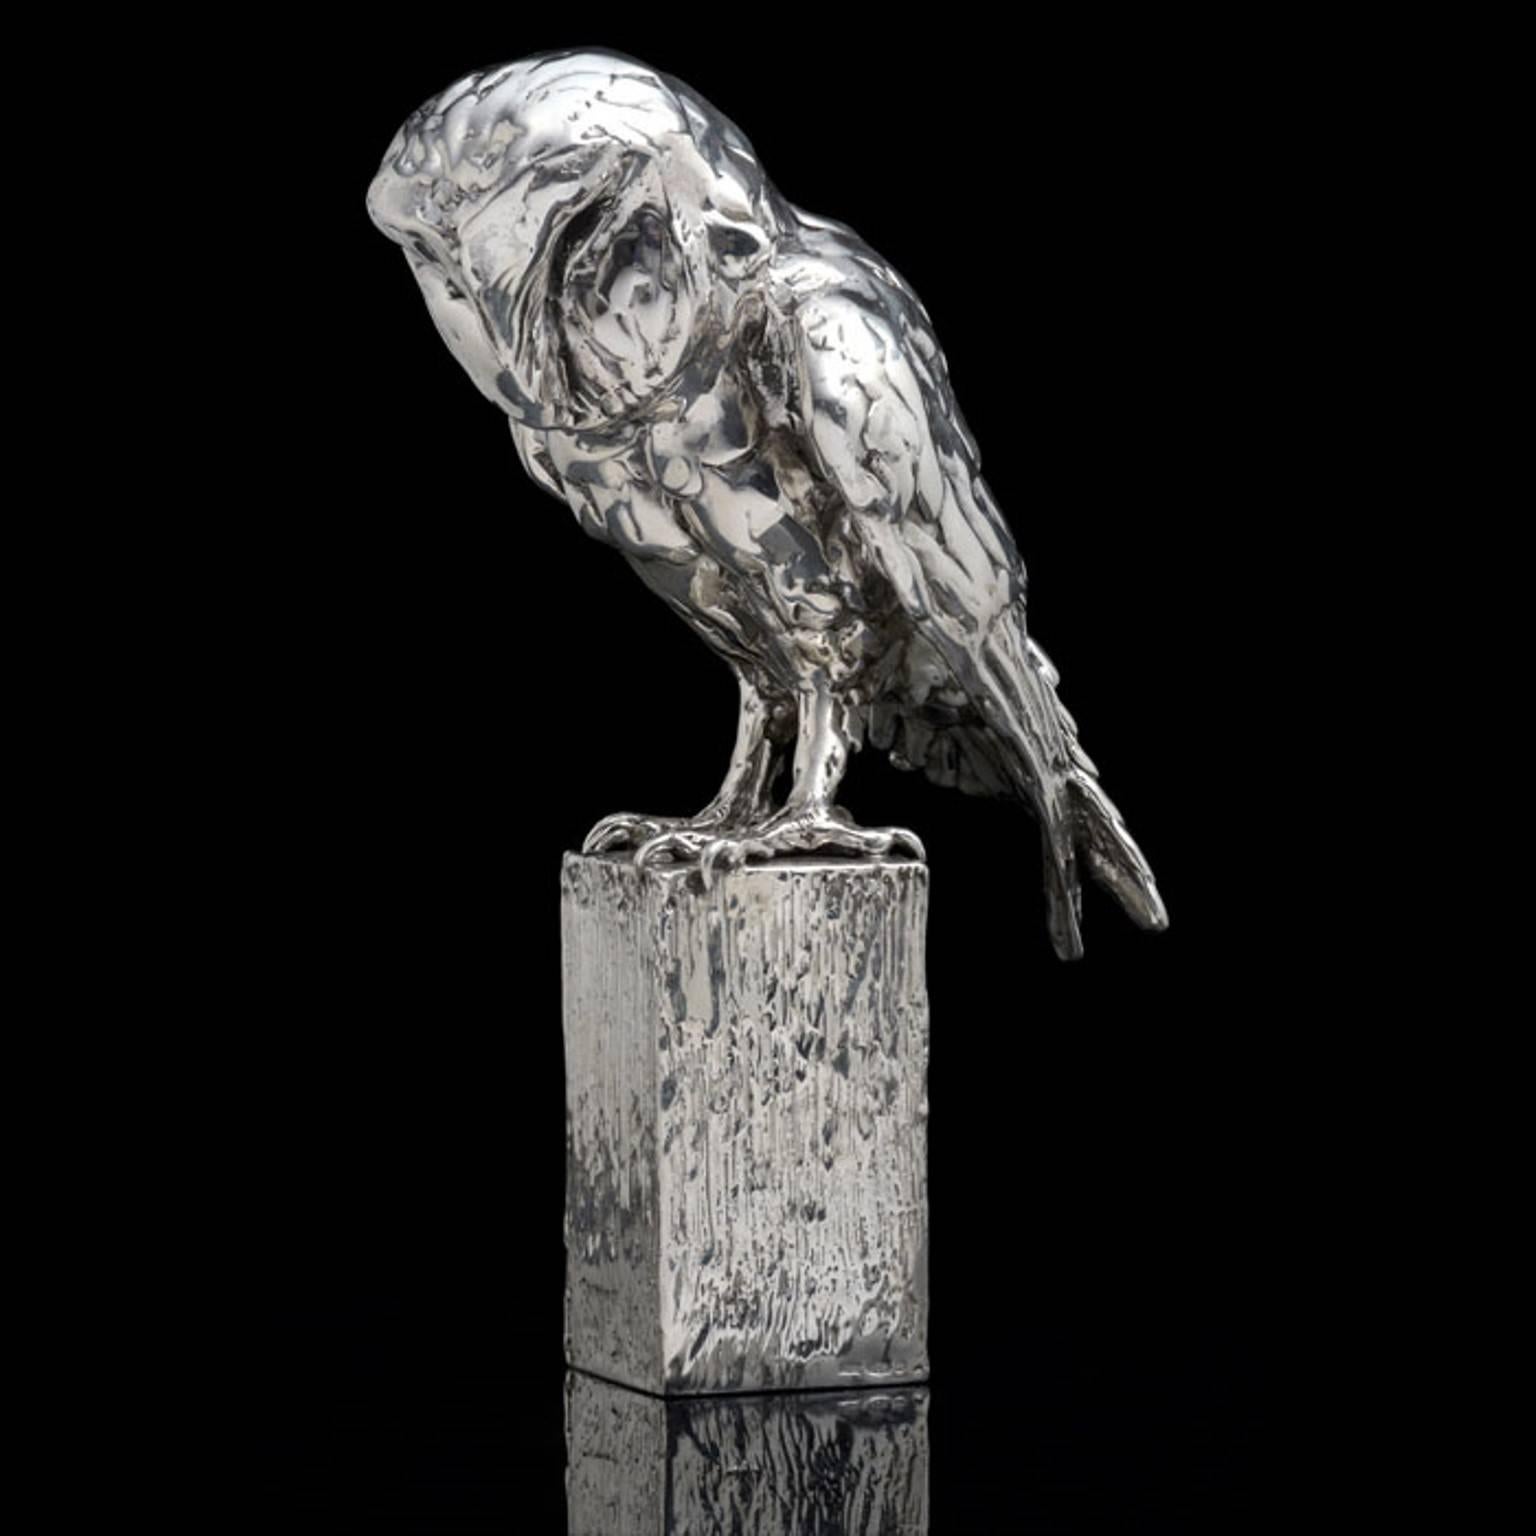  'Owl on Post'  - Sculpture by Lucy Kinsella